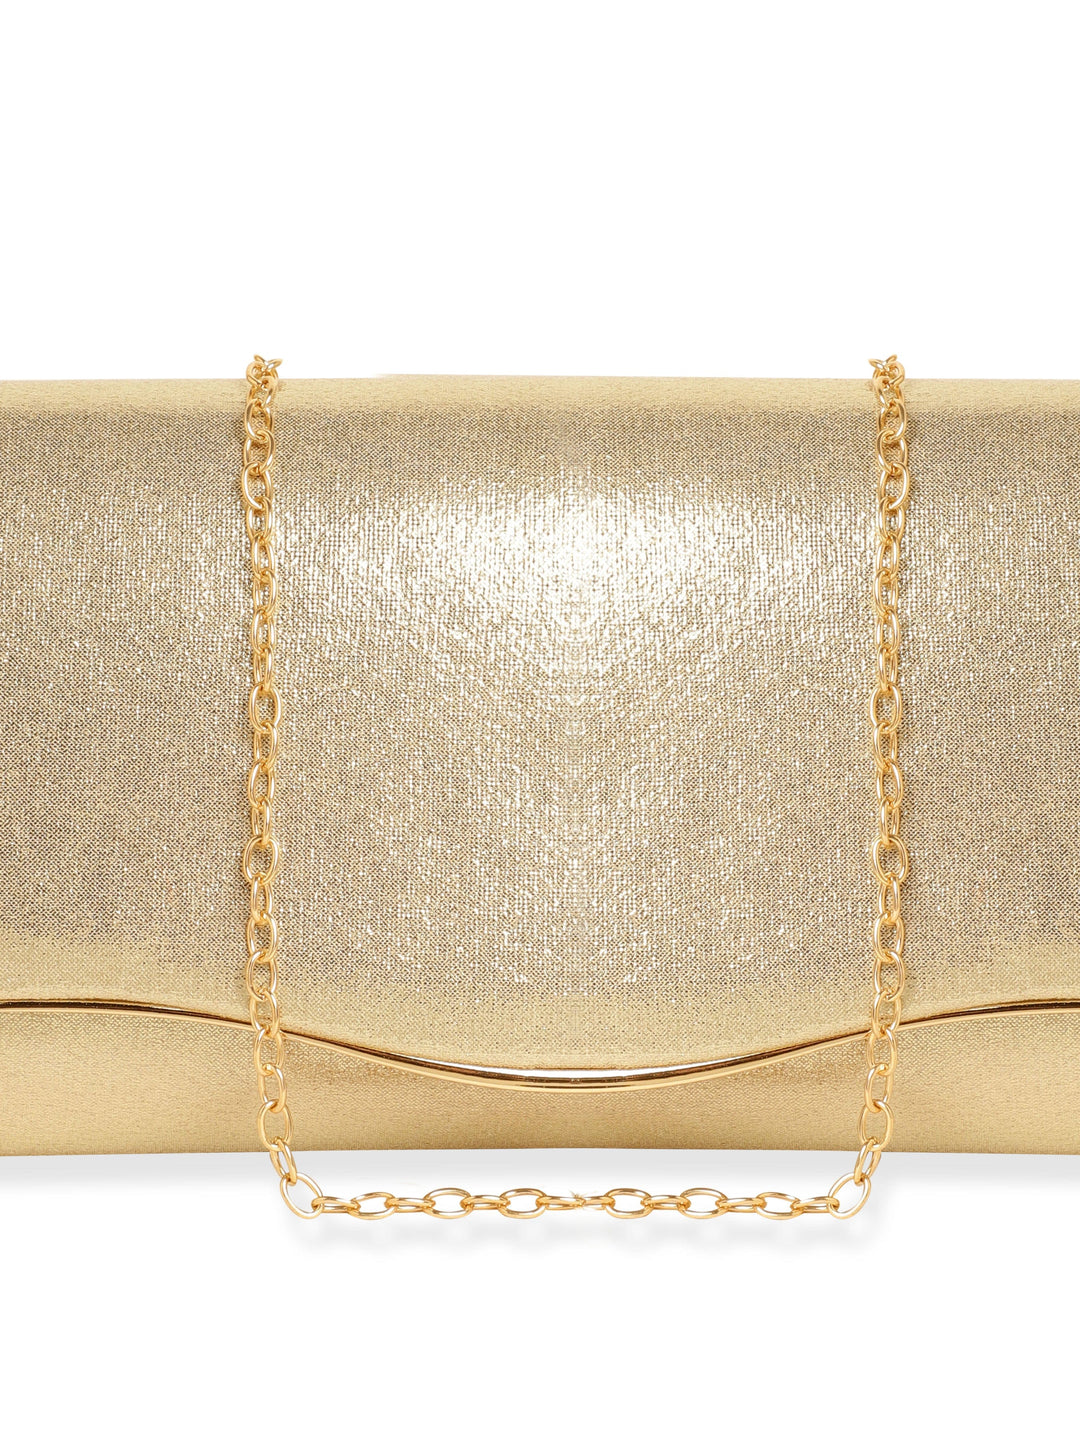 Rubans Radiant Sophistication Handcrafted Champagne Glossy Finish Clutch Bag Handbag, Wallet Accessories & Clutches